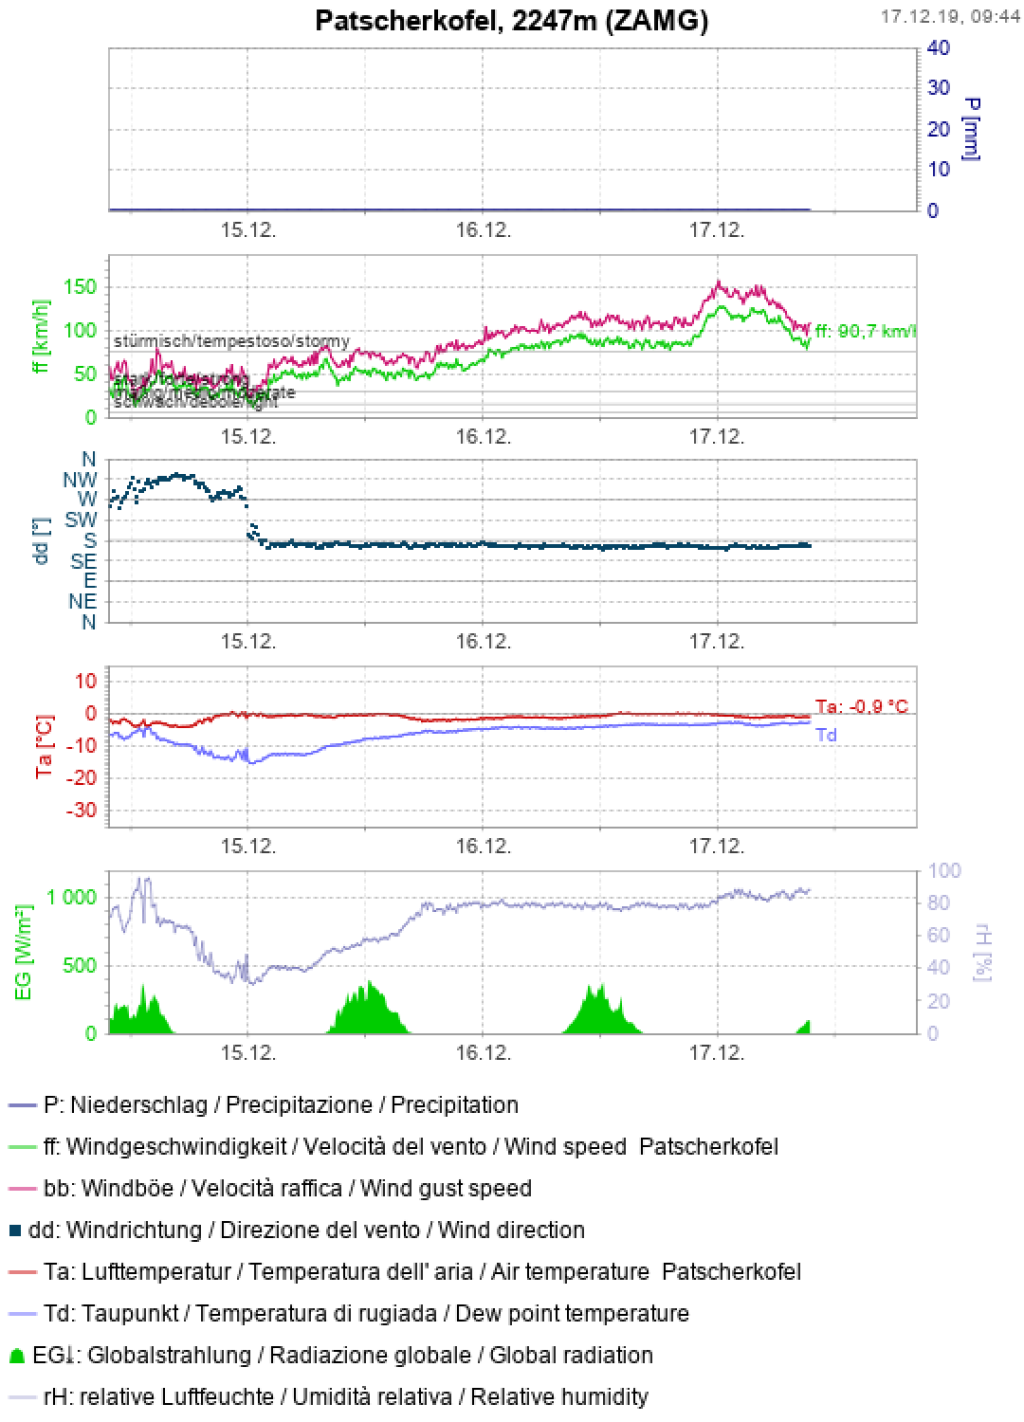 Gusts of up to 150 km/h on the Patscherkofel on 17.12. The onset of the Föhn on 15.12. can be clearly seen from the wind direction.